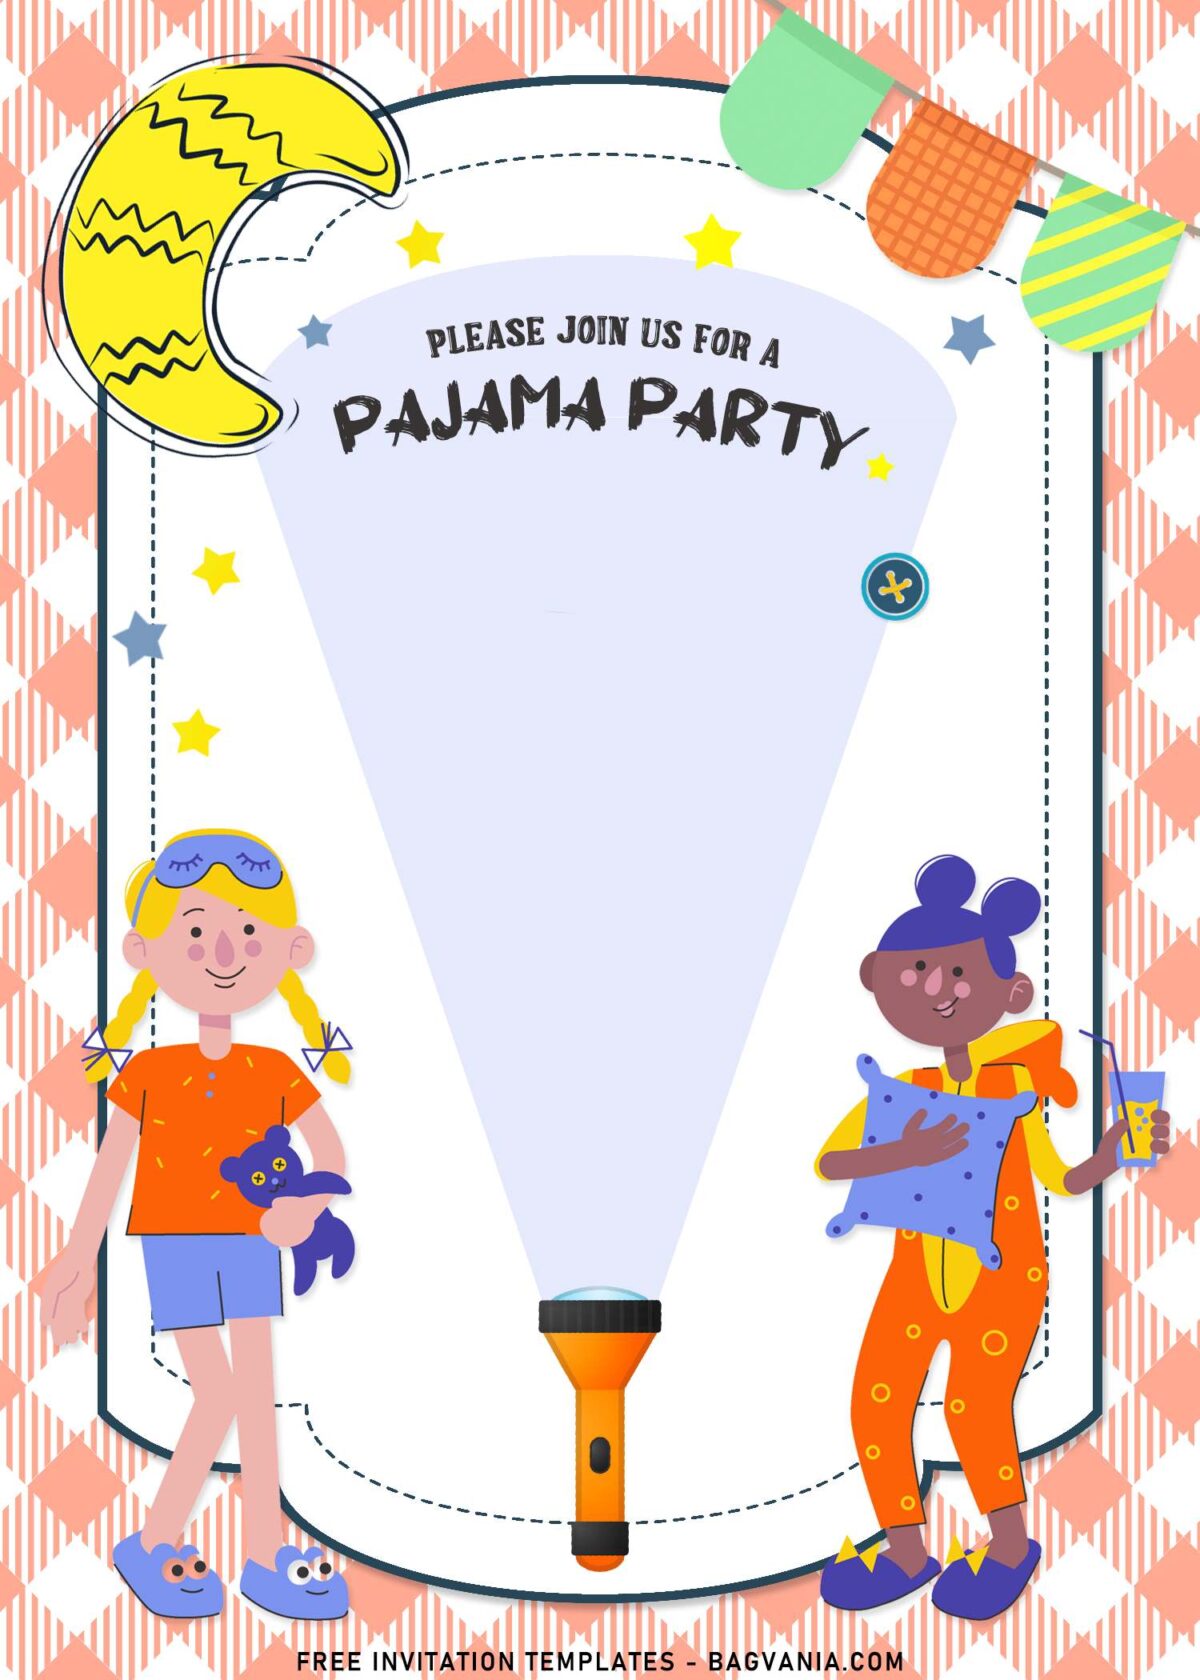 7+ Pajama Party Invitation Templates To Celebrate Your Kid's Birthday with kids in cute pajama